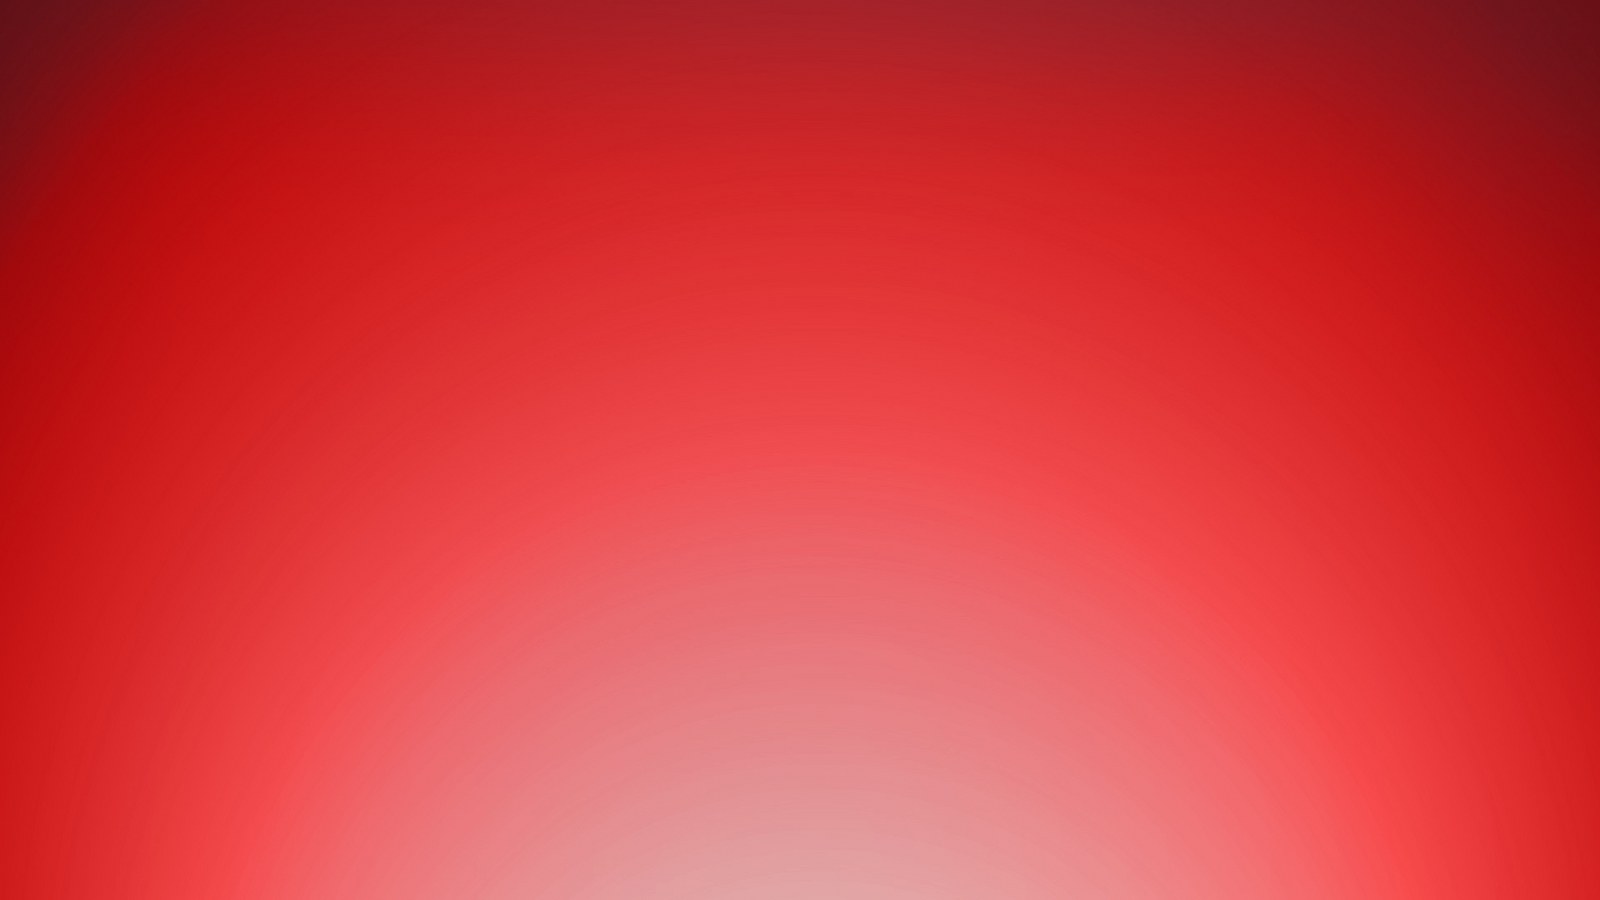 Red Background Texture S Wallpaper Cool